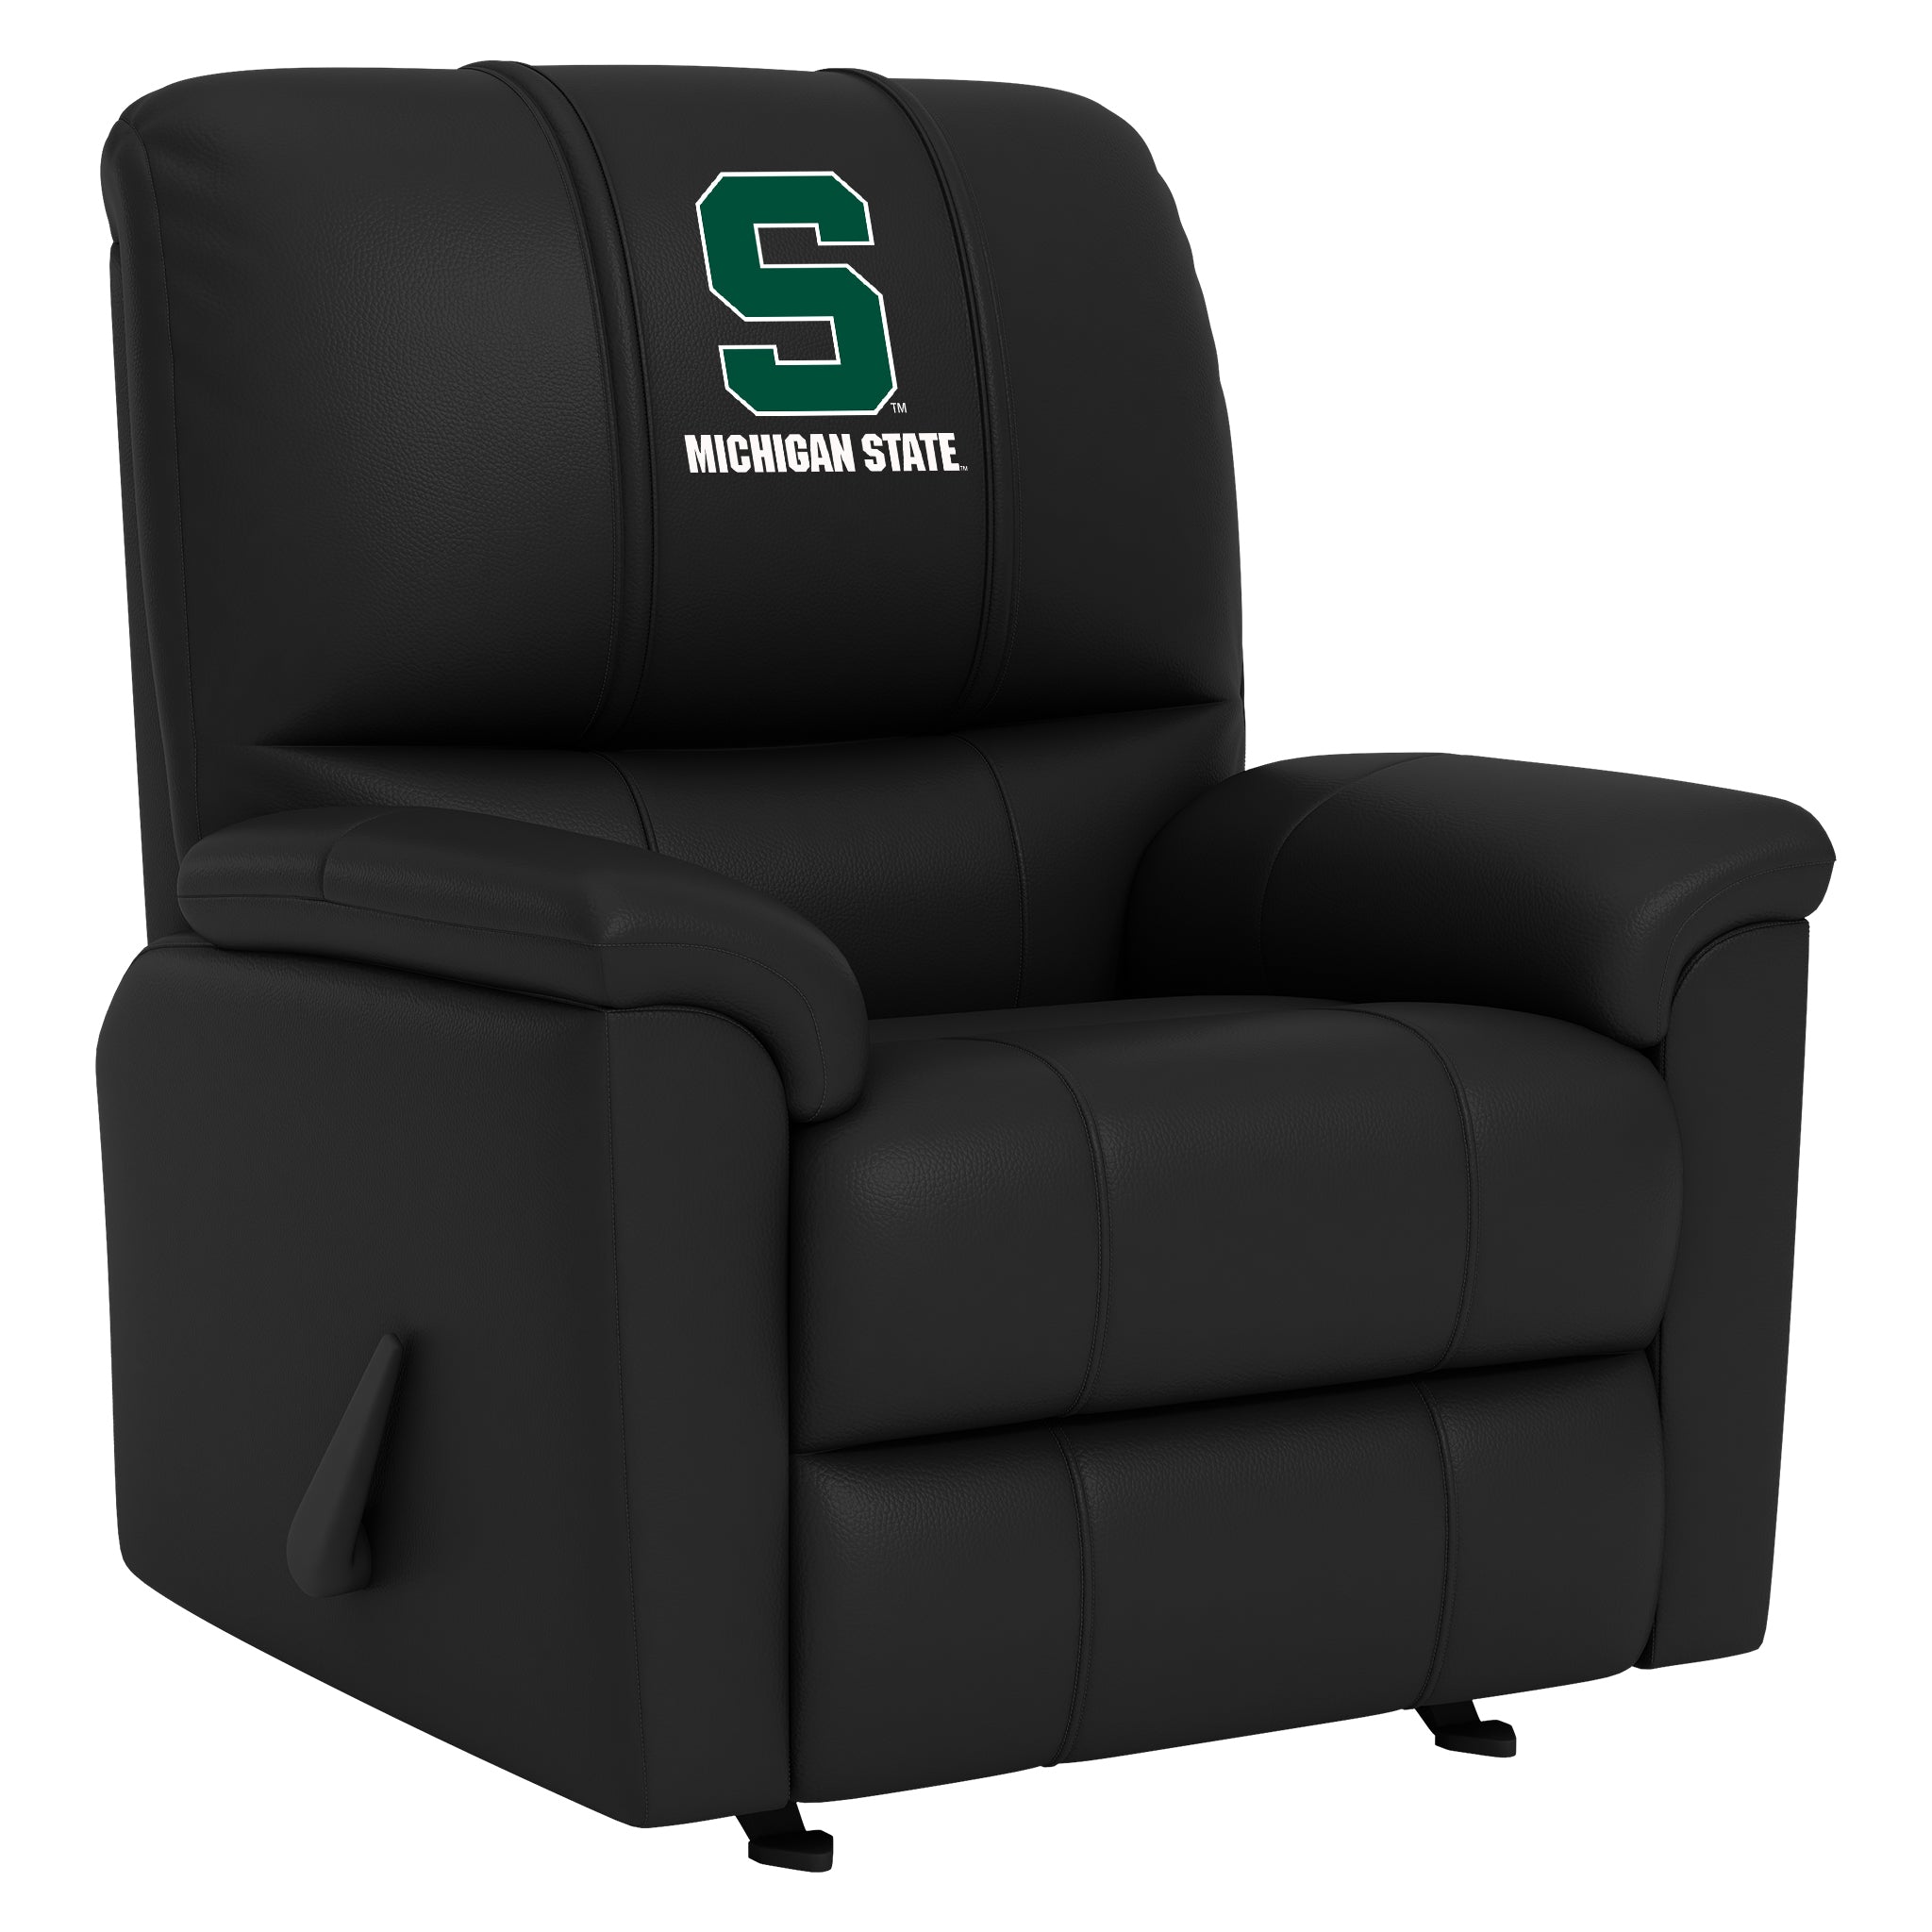 Michigan State Silver Club Chair with Michigan State Secondary Logo